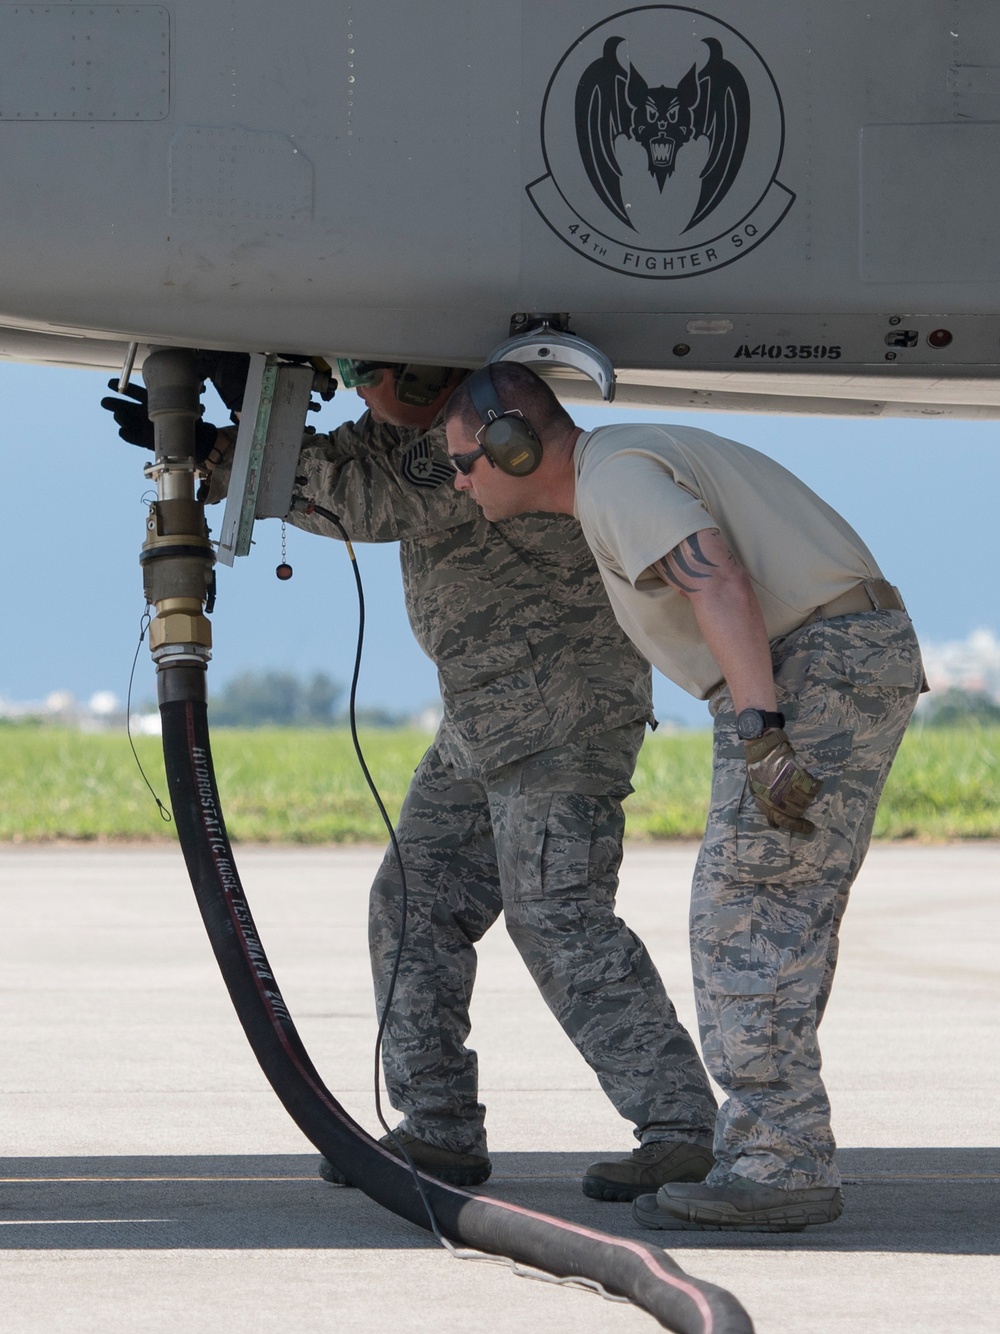 Fueling the tropic thunder; Tropic ACE finding fueling solutions